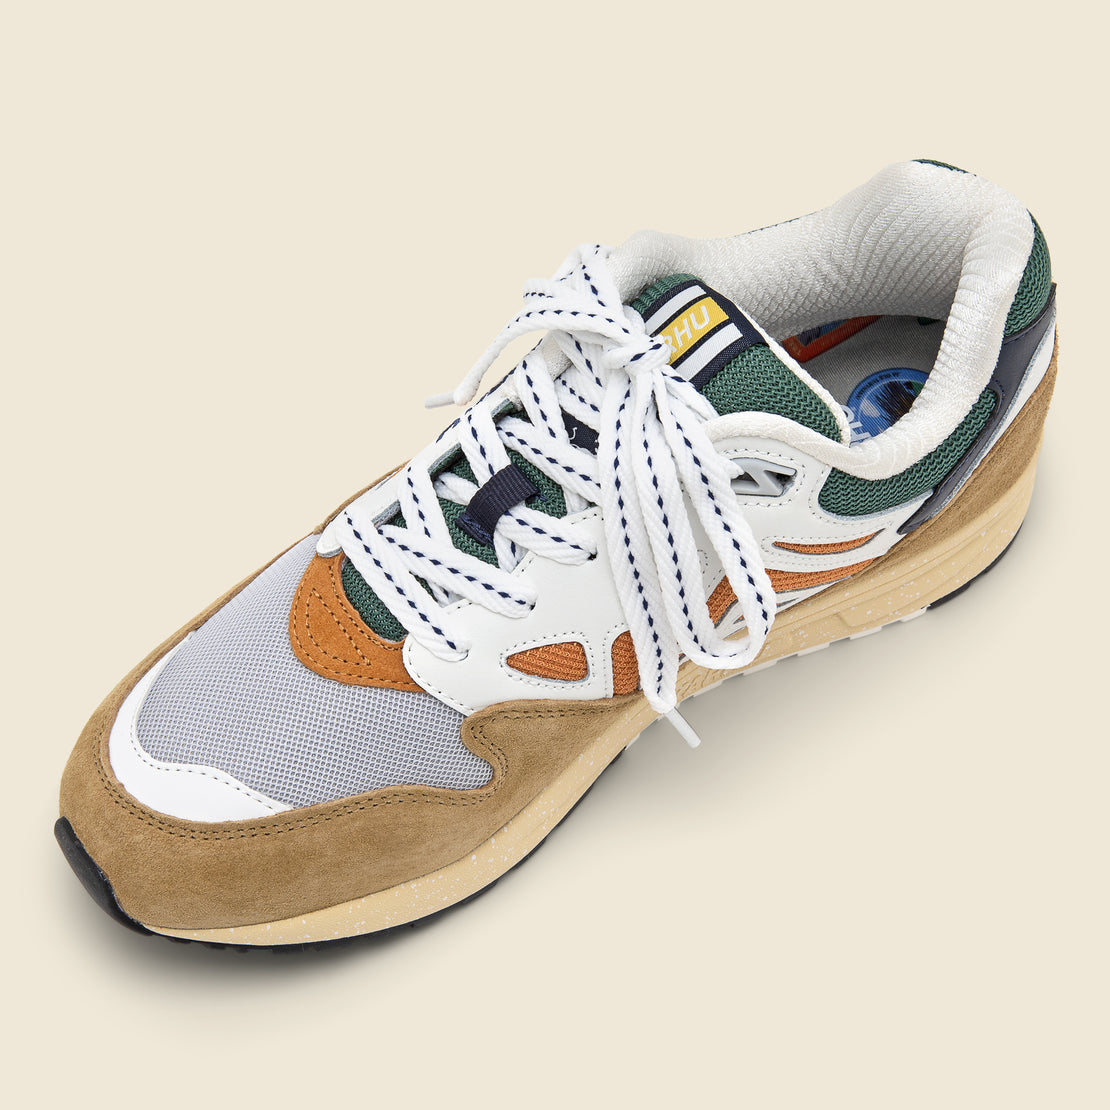 Legacy Sneaker - Curry/Nugget - Karhu - STAG Provisions - Shoes - Athletic